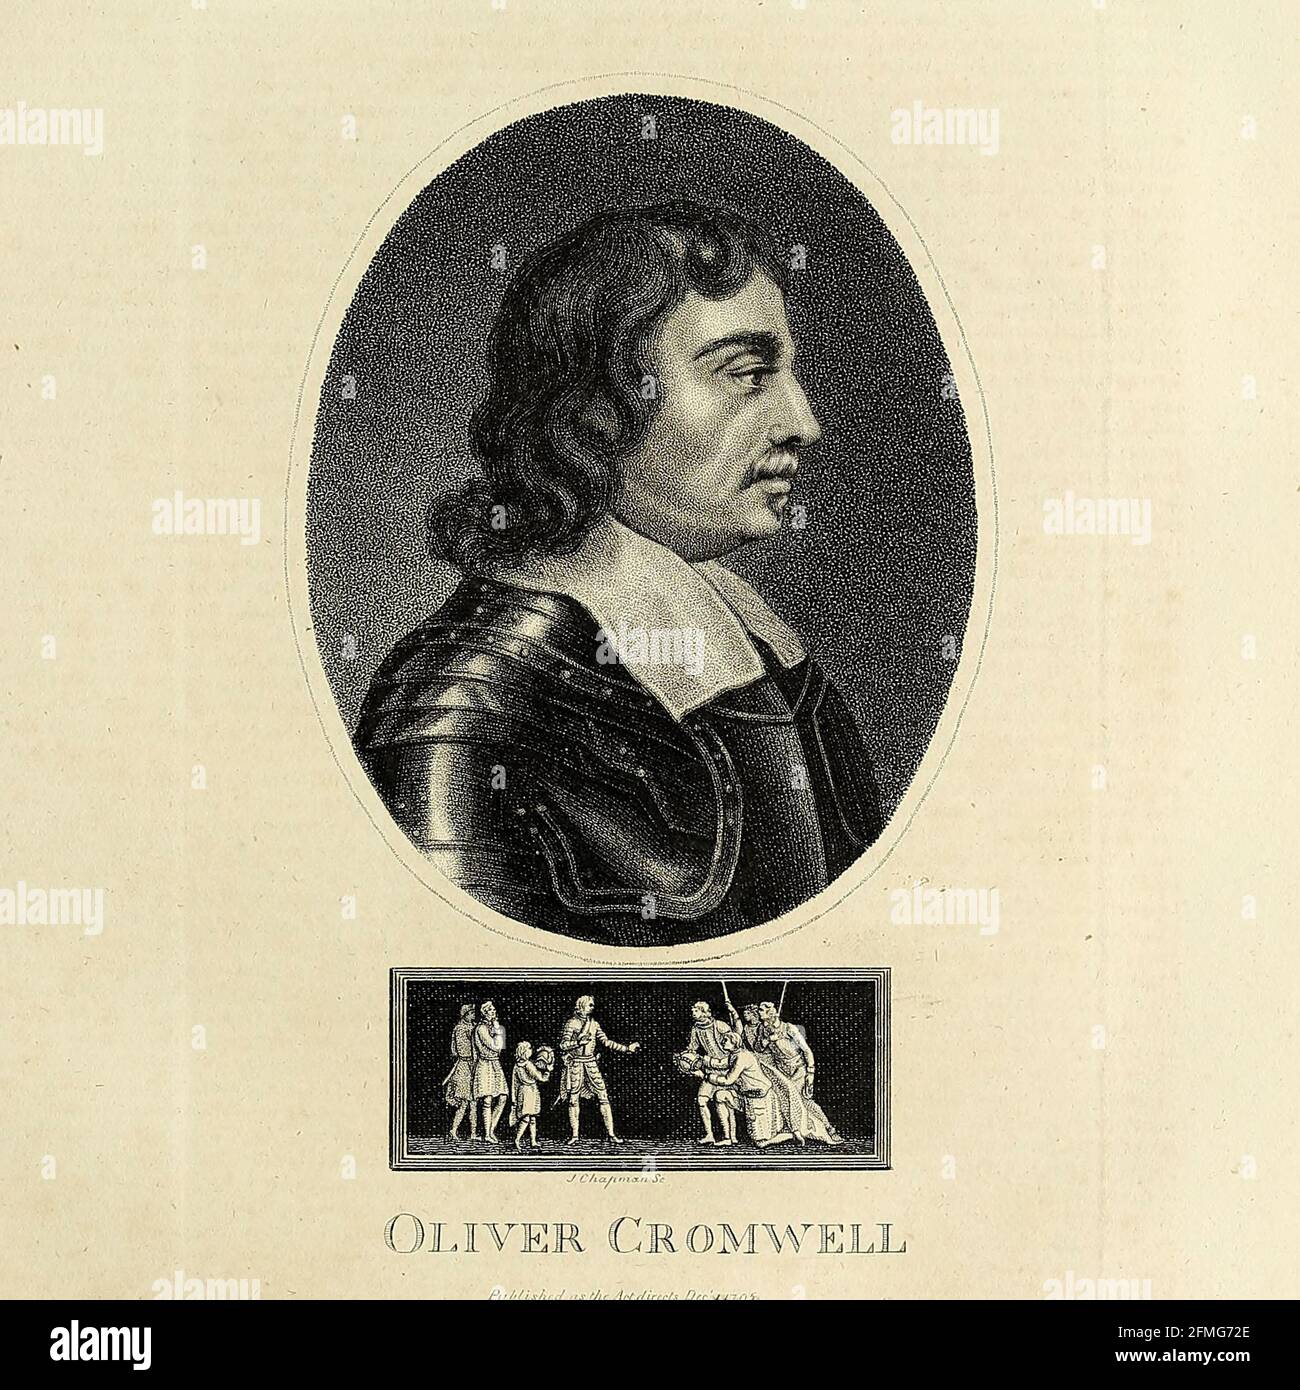 Oliver Cromwell (25 April 1599 – 3 September 1658) was an English general and statesman who, first as a subordinate and later as Commander-in-Chief, led armies of the Parliament of England against King Charles I during the English Civil War, subsequently ruling the British Isles as Lord Protector from 1653 until his death in 1658. He acted simultaneously as head of state and head of government of the new republican commonwealth. Copperplate engraving From the Encyclopaedia Londinensis or, Universal dictionary of arts, sciences, and literature; Volume V;  Edited by Wilkes, John. Published in Lo Stock Photo